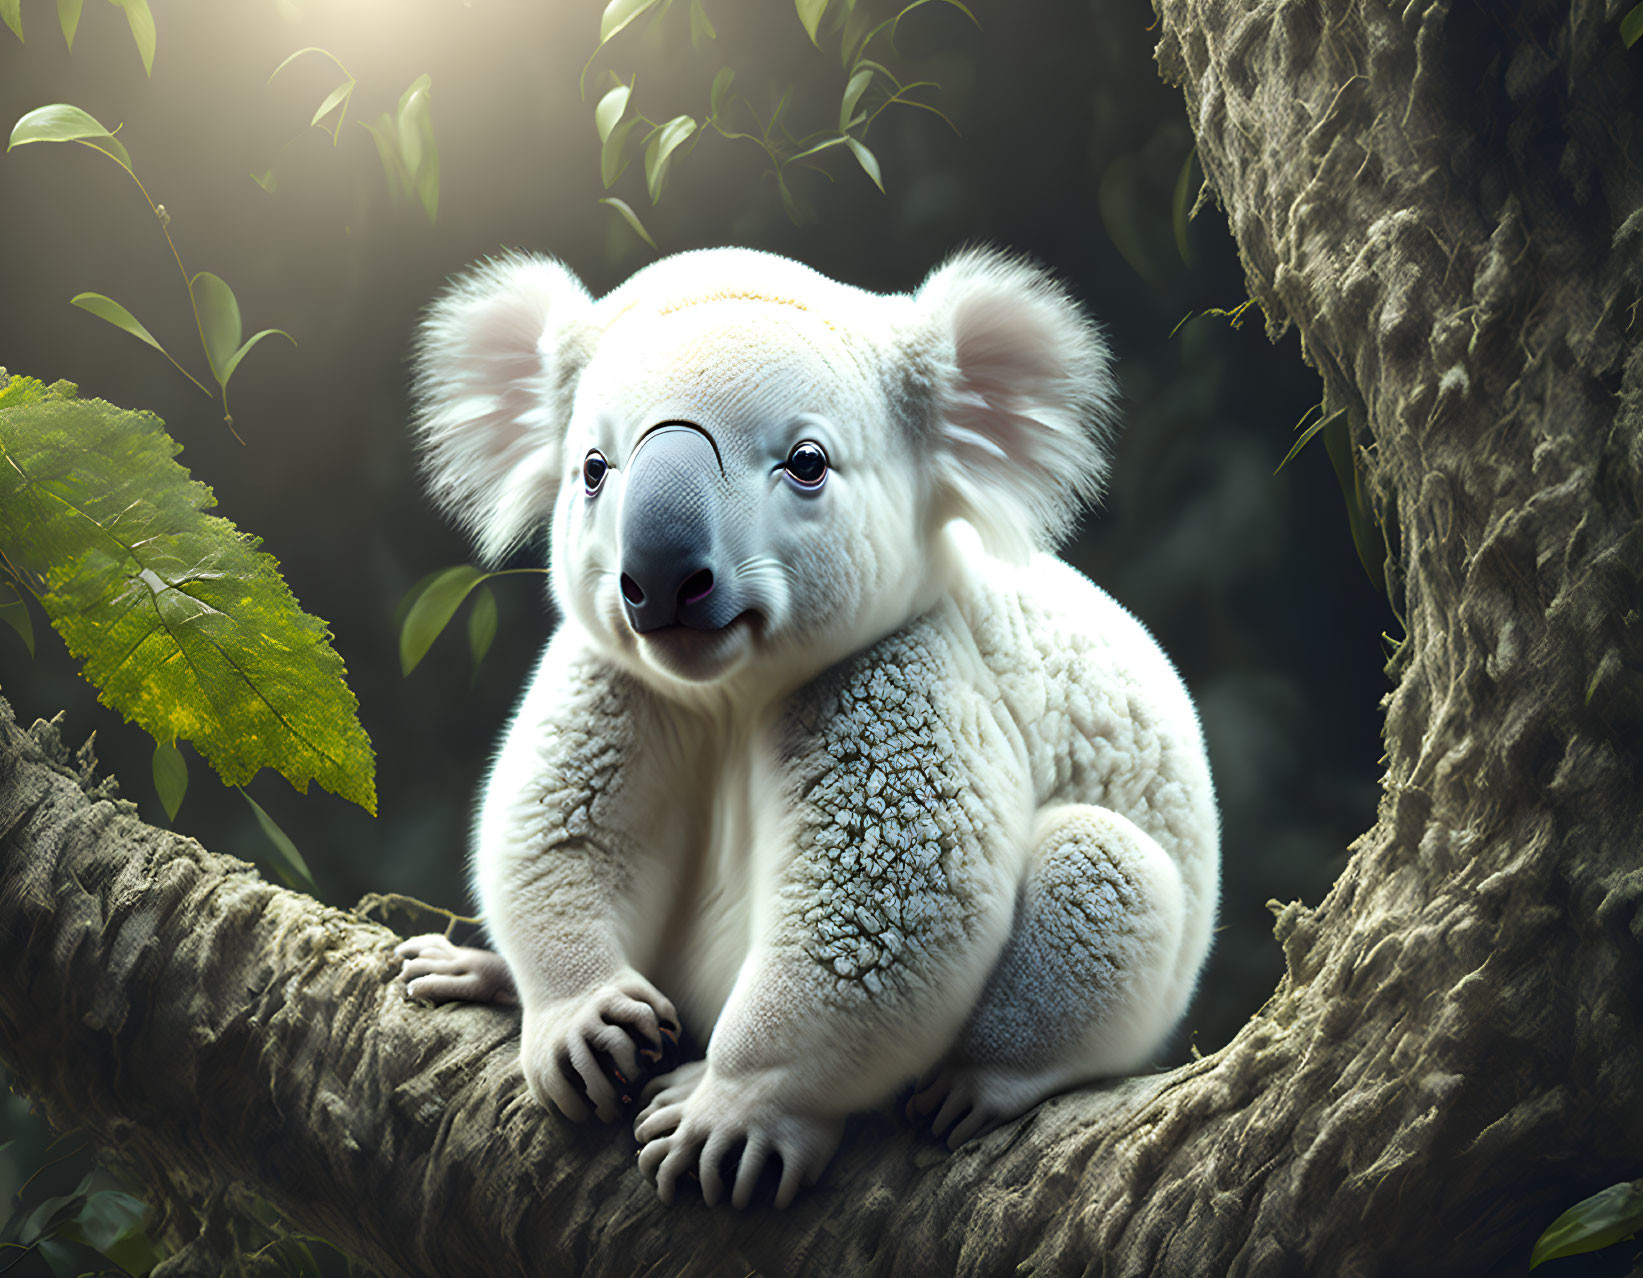 Fluffy koala on tree branch with green leaves and soft light